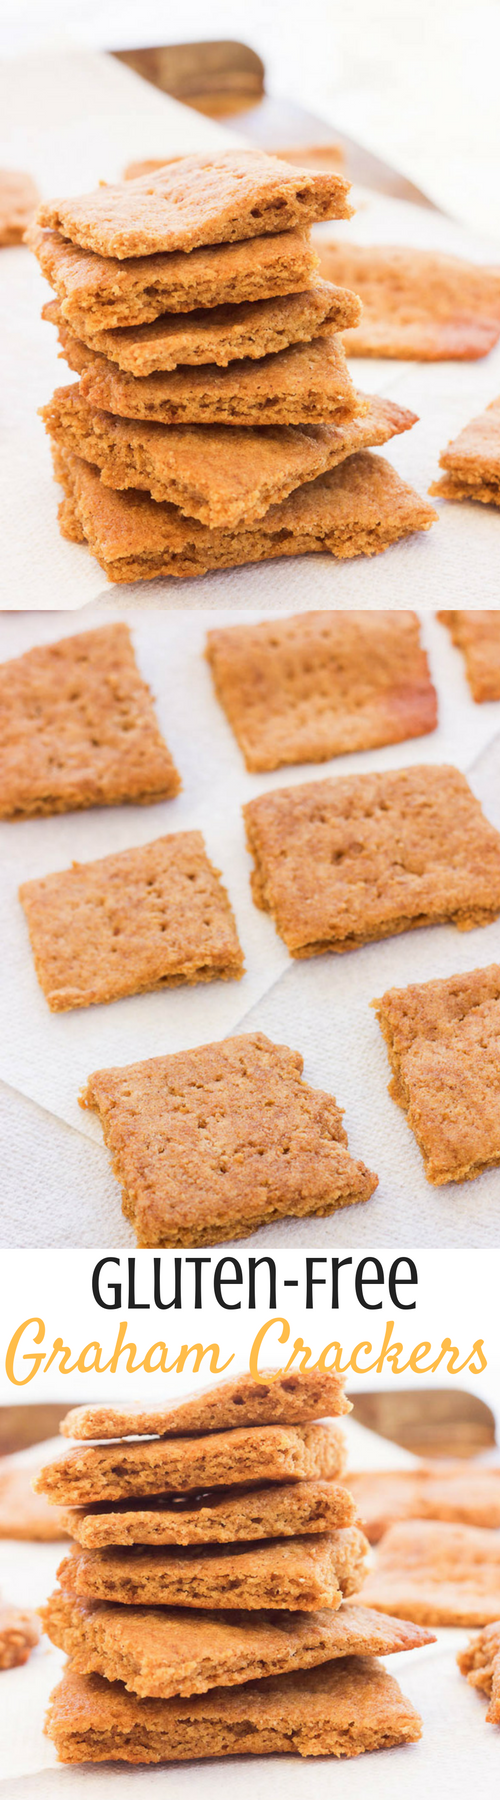 Paleo Gluten-Free Graham Crackers || These paleo gluten-free graham crackers are an easy 15 minute recipe that uses simple ingredients to make moist on the inside and toasted on the outside squares just in time for s'more season! www.BlessHerHeartYall.com